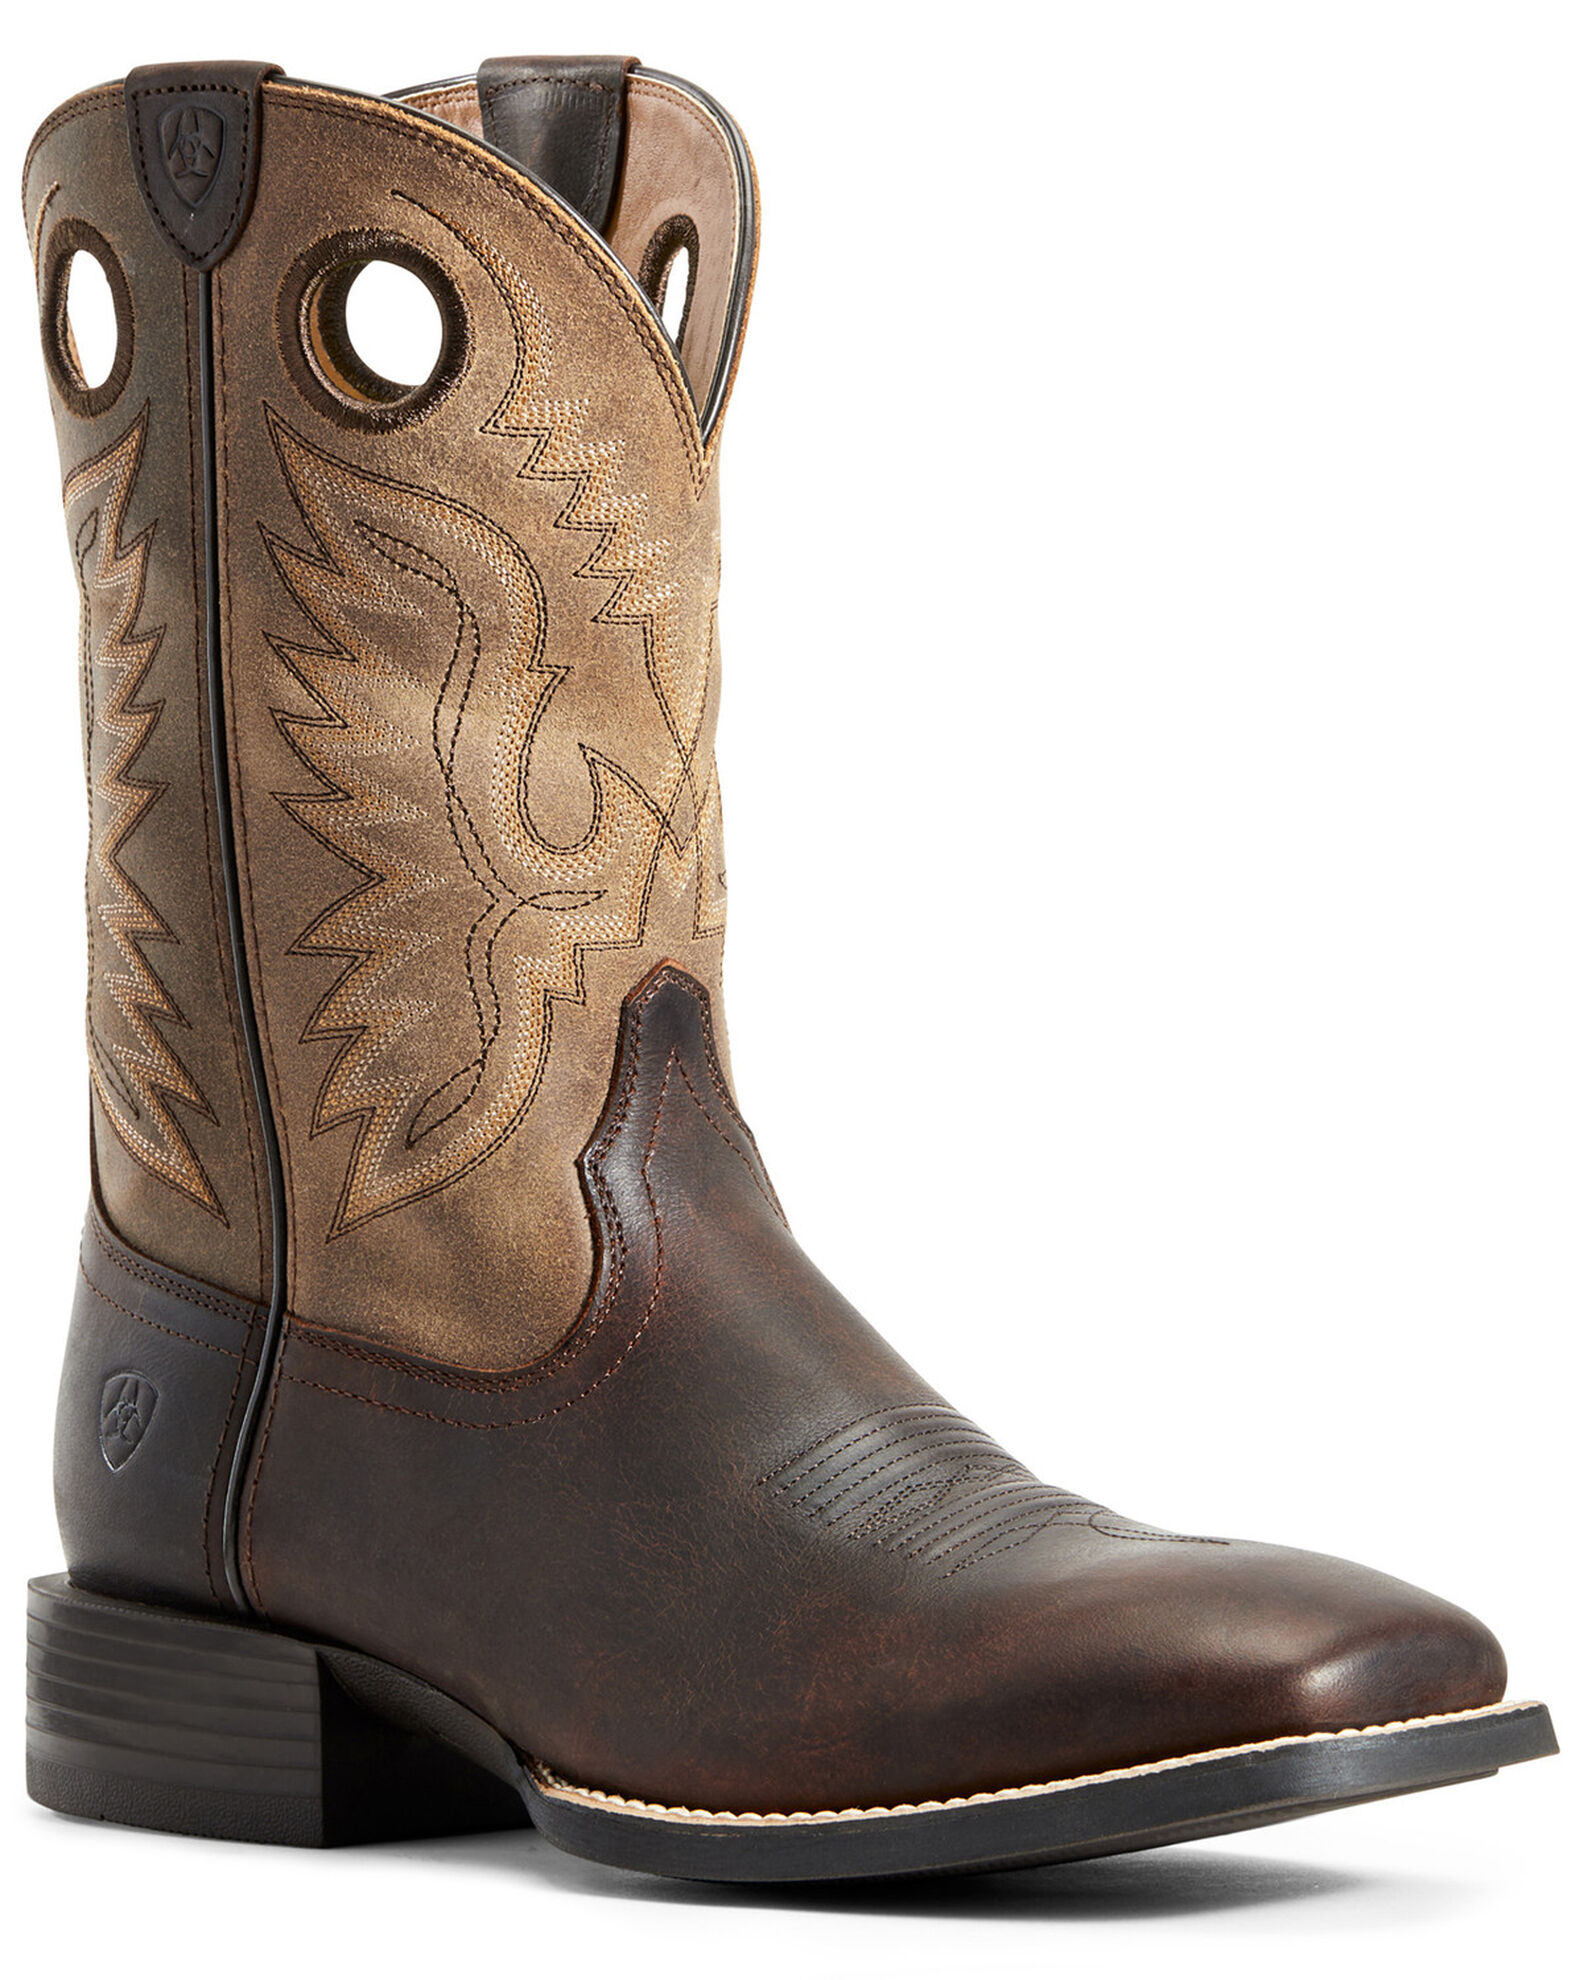 Does Boot Barn Own Ariat?